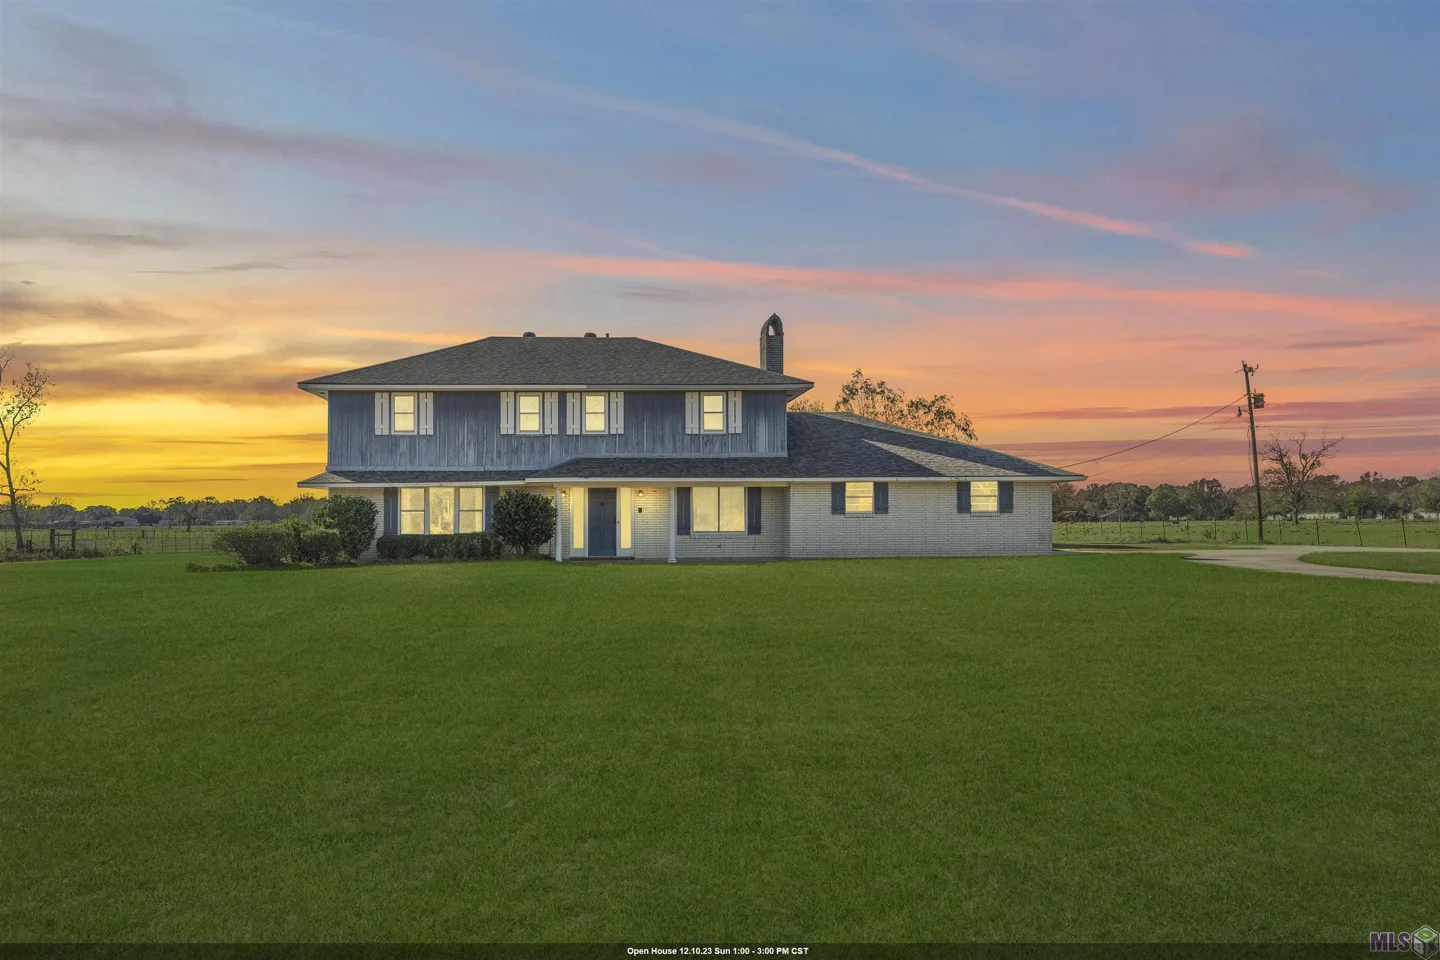 Expansive Two-Story, Four Bed, 3 Bath Residence on 3 Acres